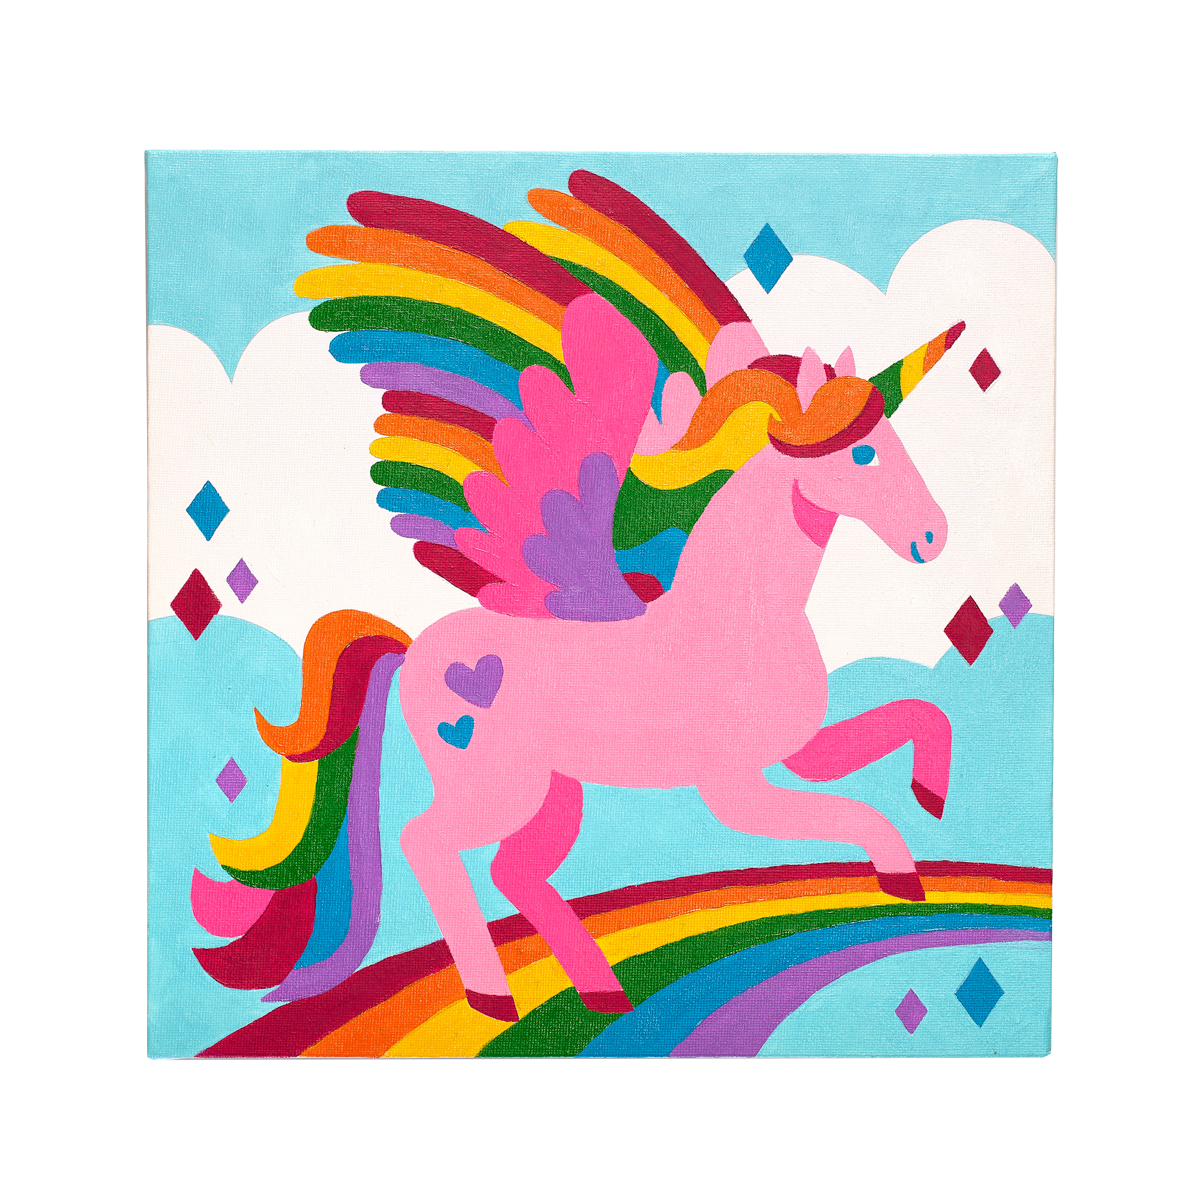 the_toy_box_india - *Unicorn Art Set* Let them play with colors and see the  magic! #thetoonbox #toys #colors #painting #paint #littlethings #colorful# unicorn #unicornbox #giftsforkids #giftsforher #giftingideas #greatideas  #play #toy #toys #toyshop